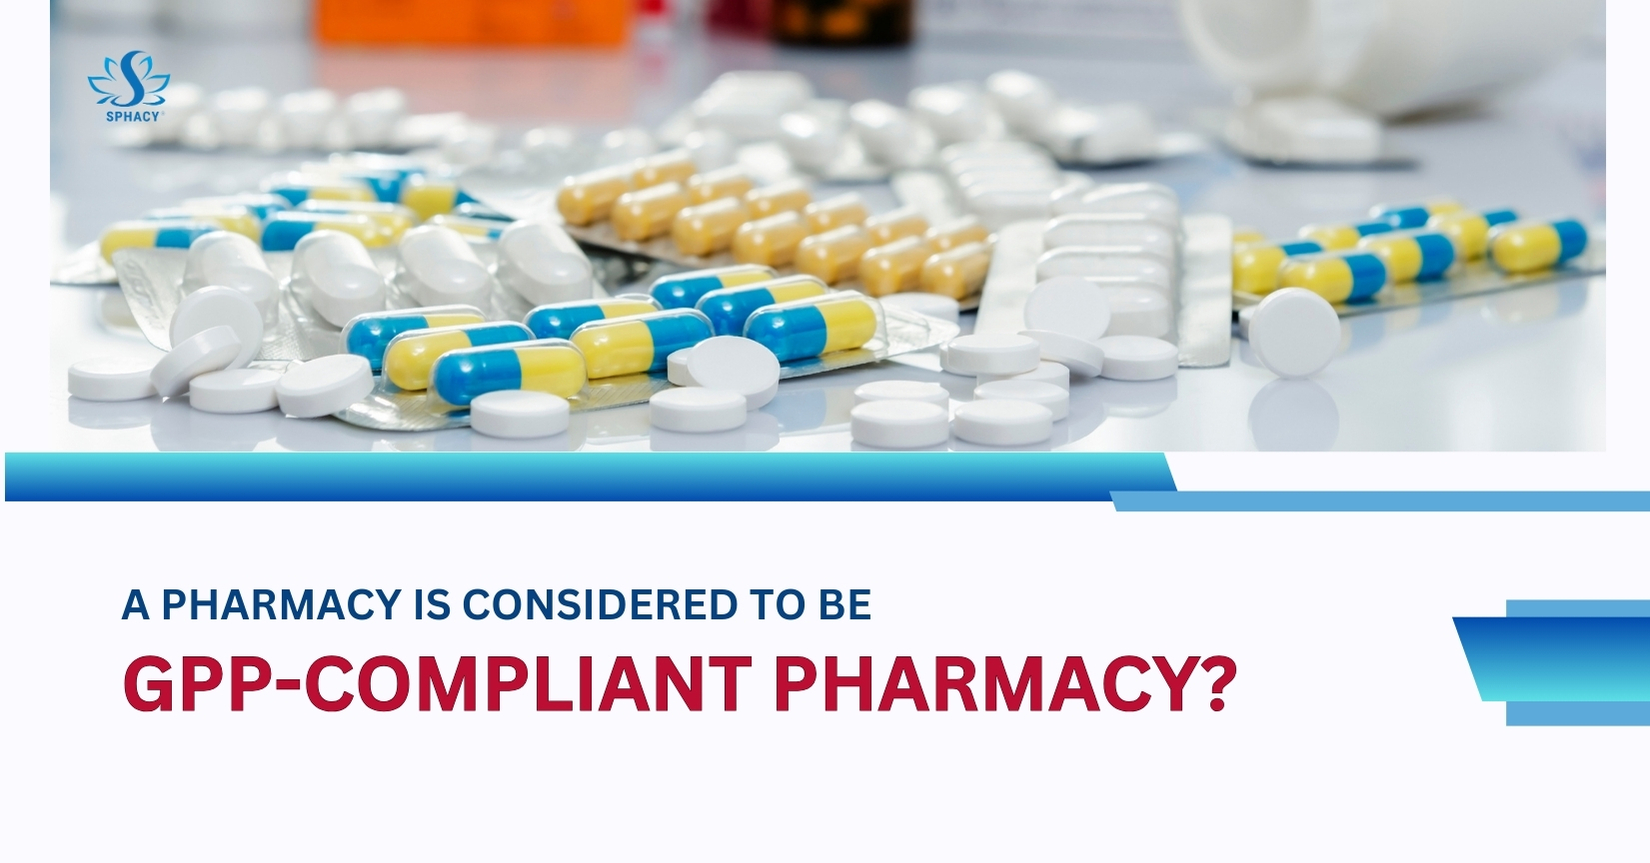 What qualifies a pharmacy as meeting GPP standards?